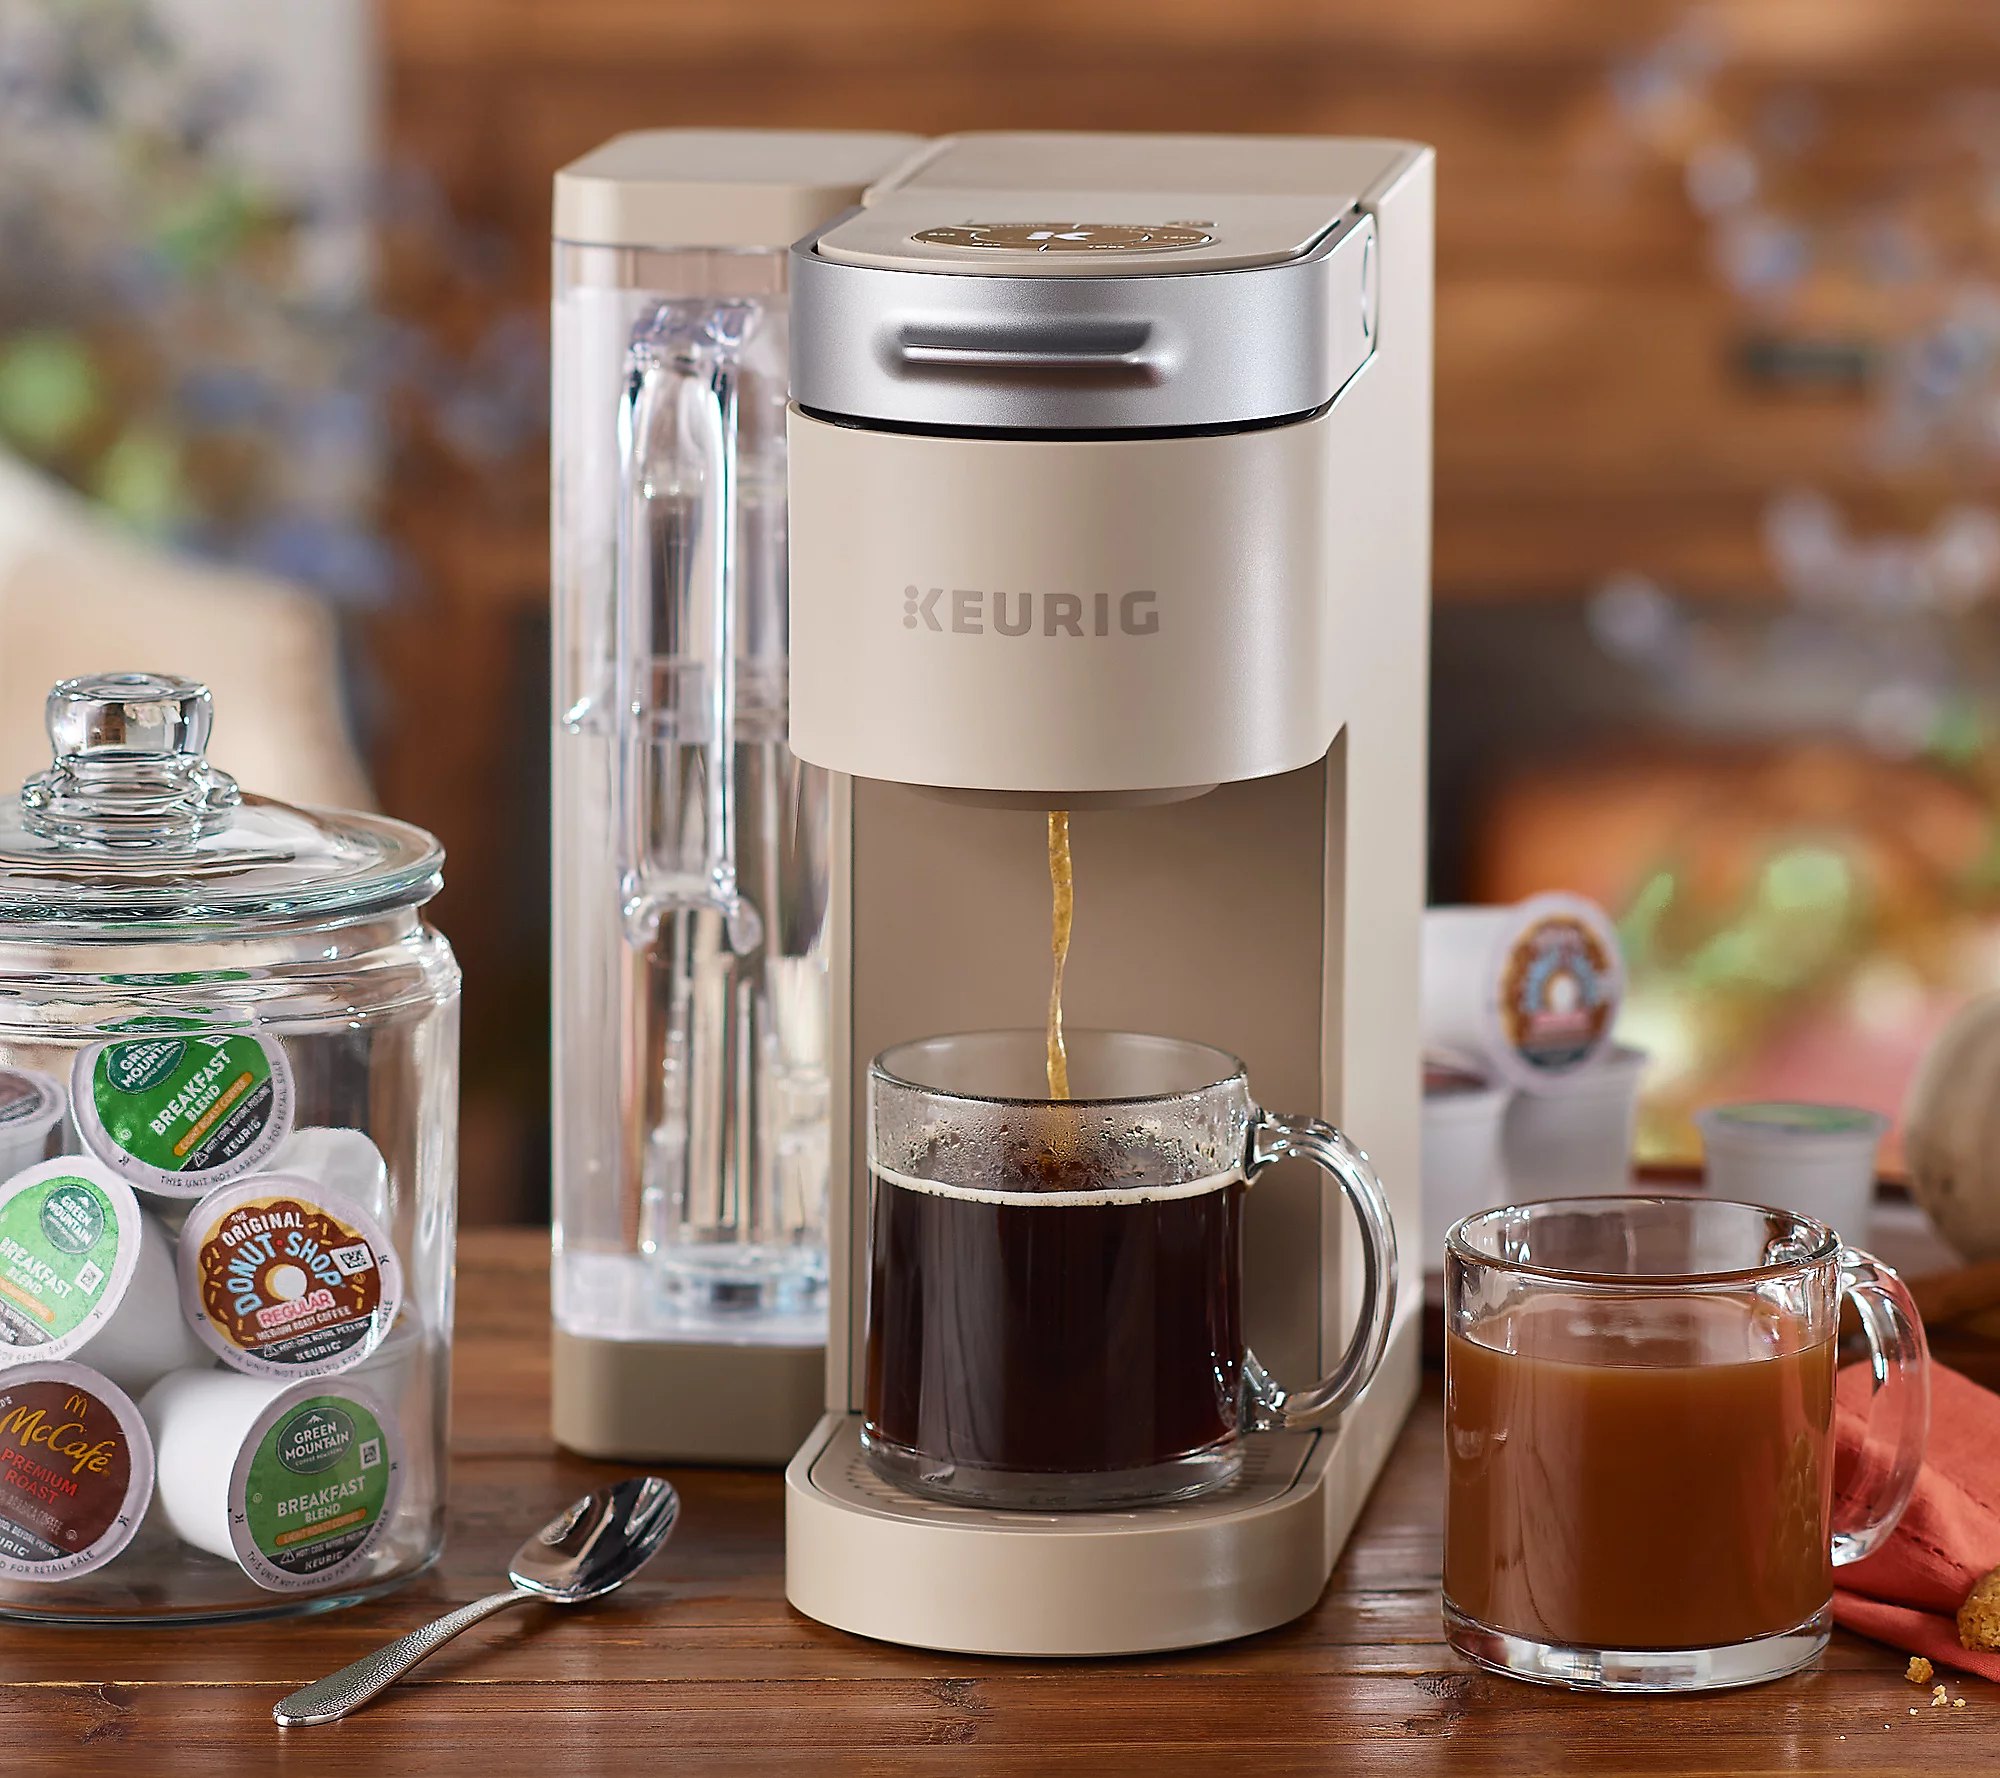 SMEG Retro Coffee Maker Review 2024: A Blast From the Past!